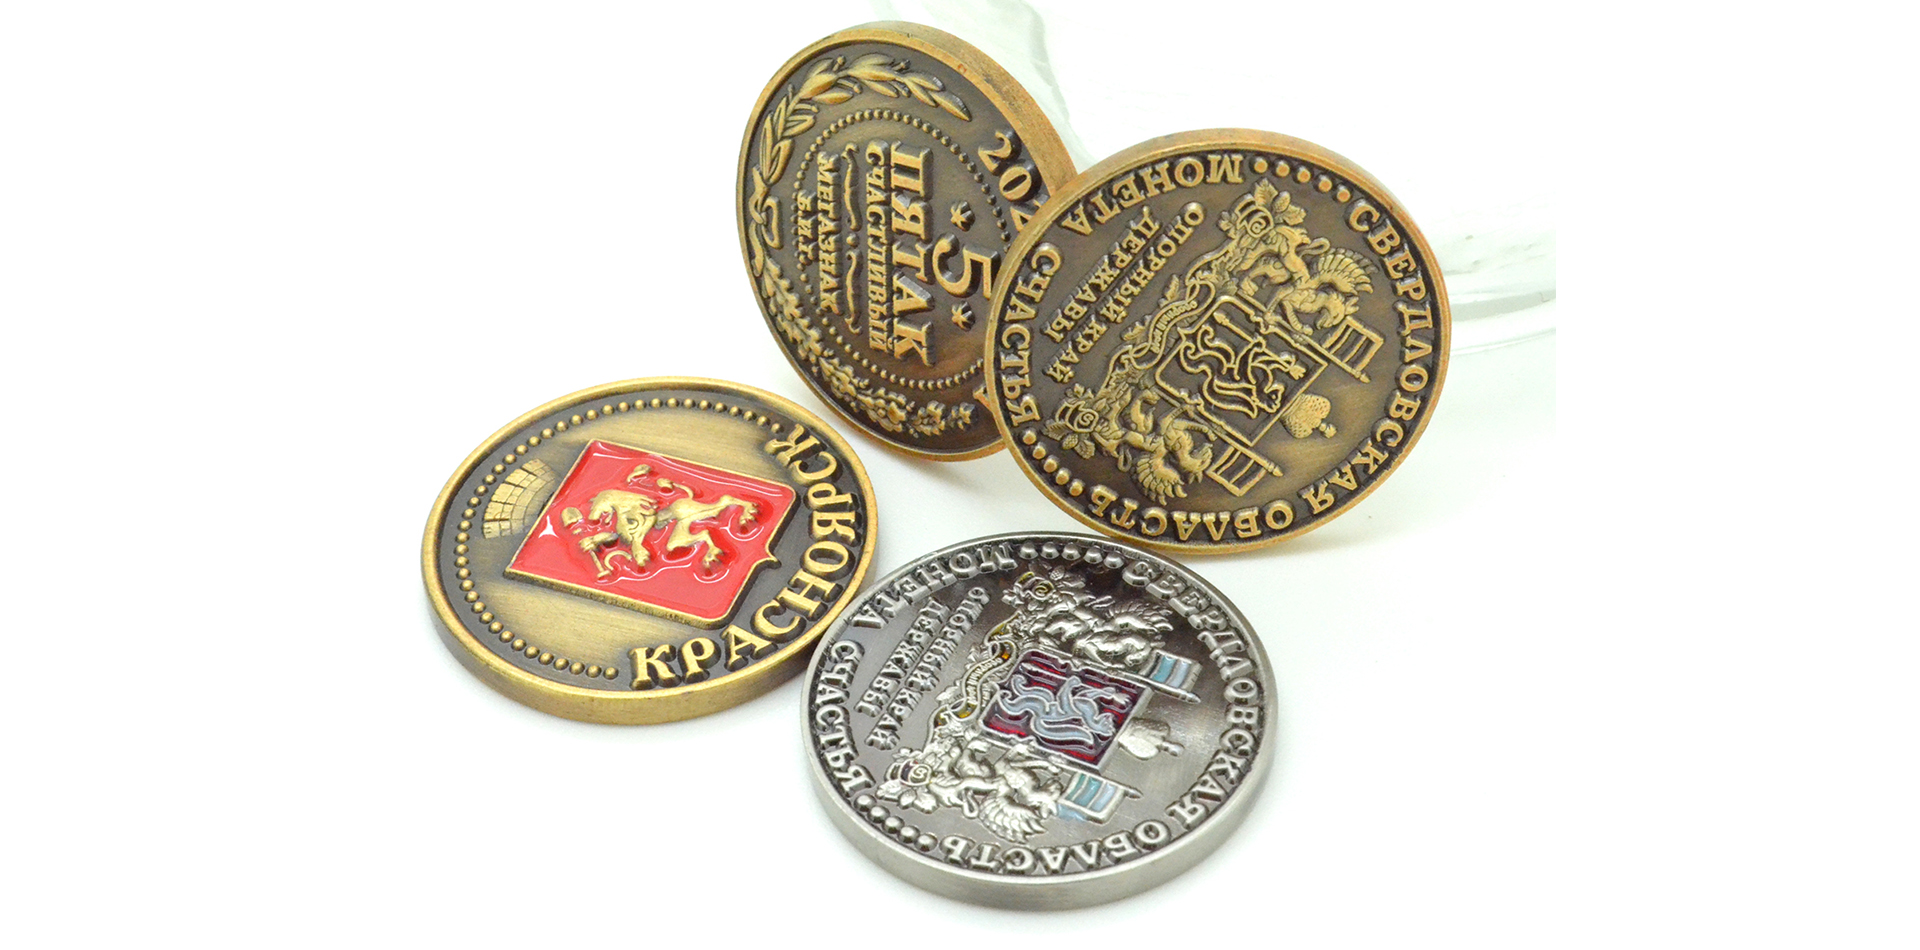 Why Choose Us For Your Custom Commemorative Coins?